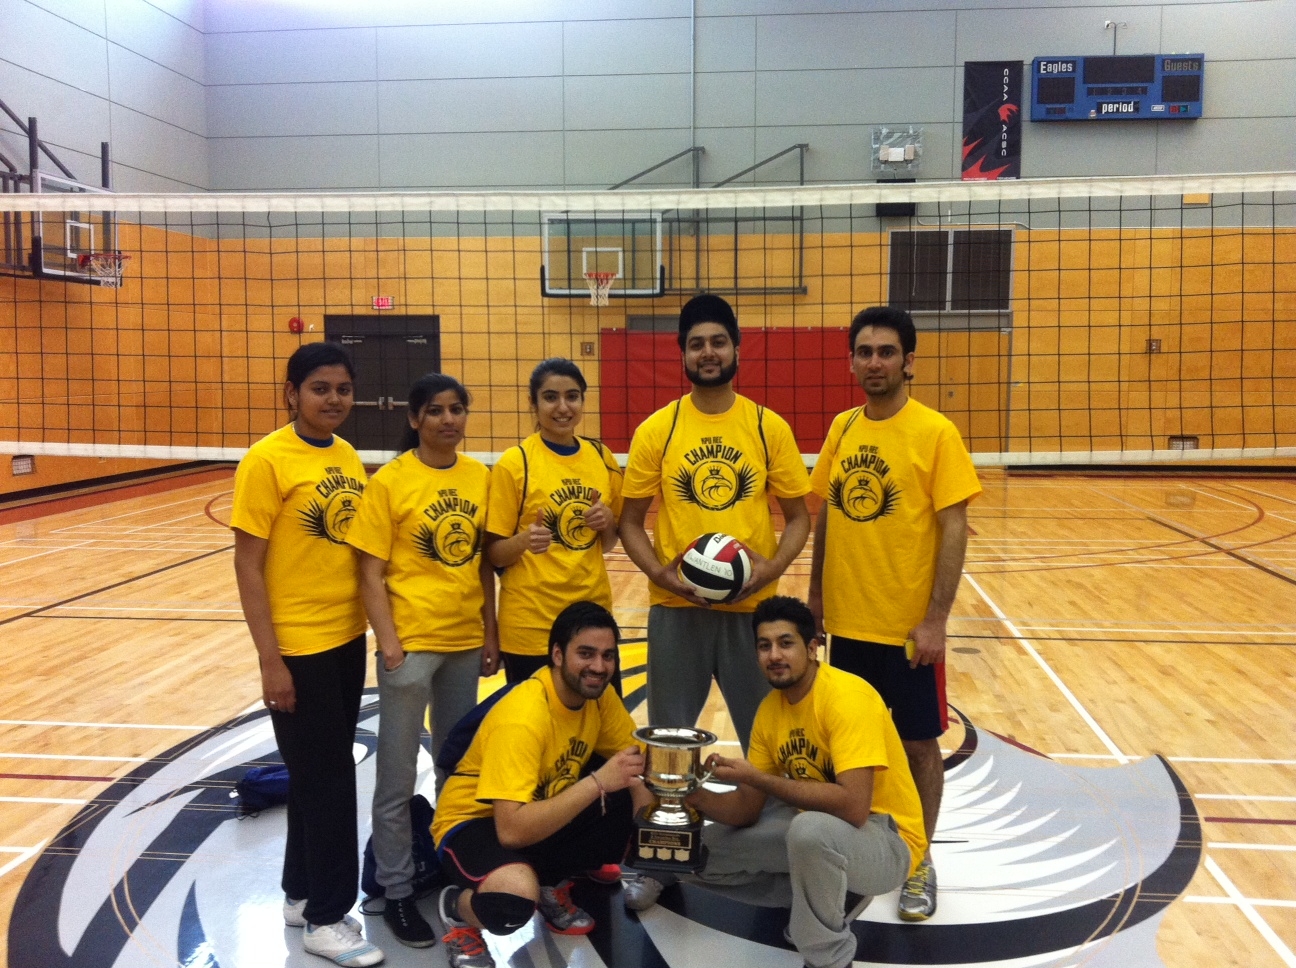 Coed Volleyball League Champions